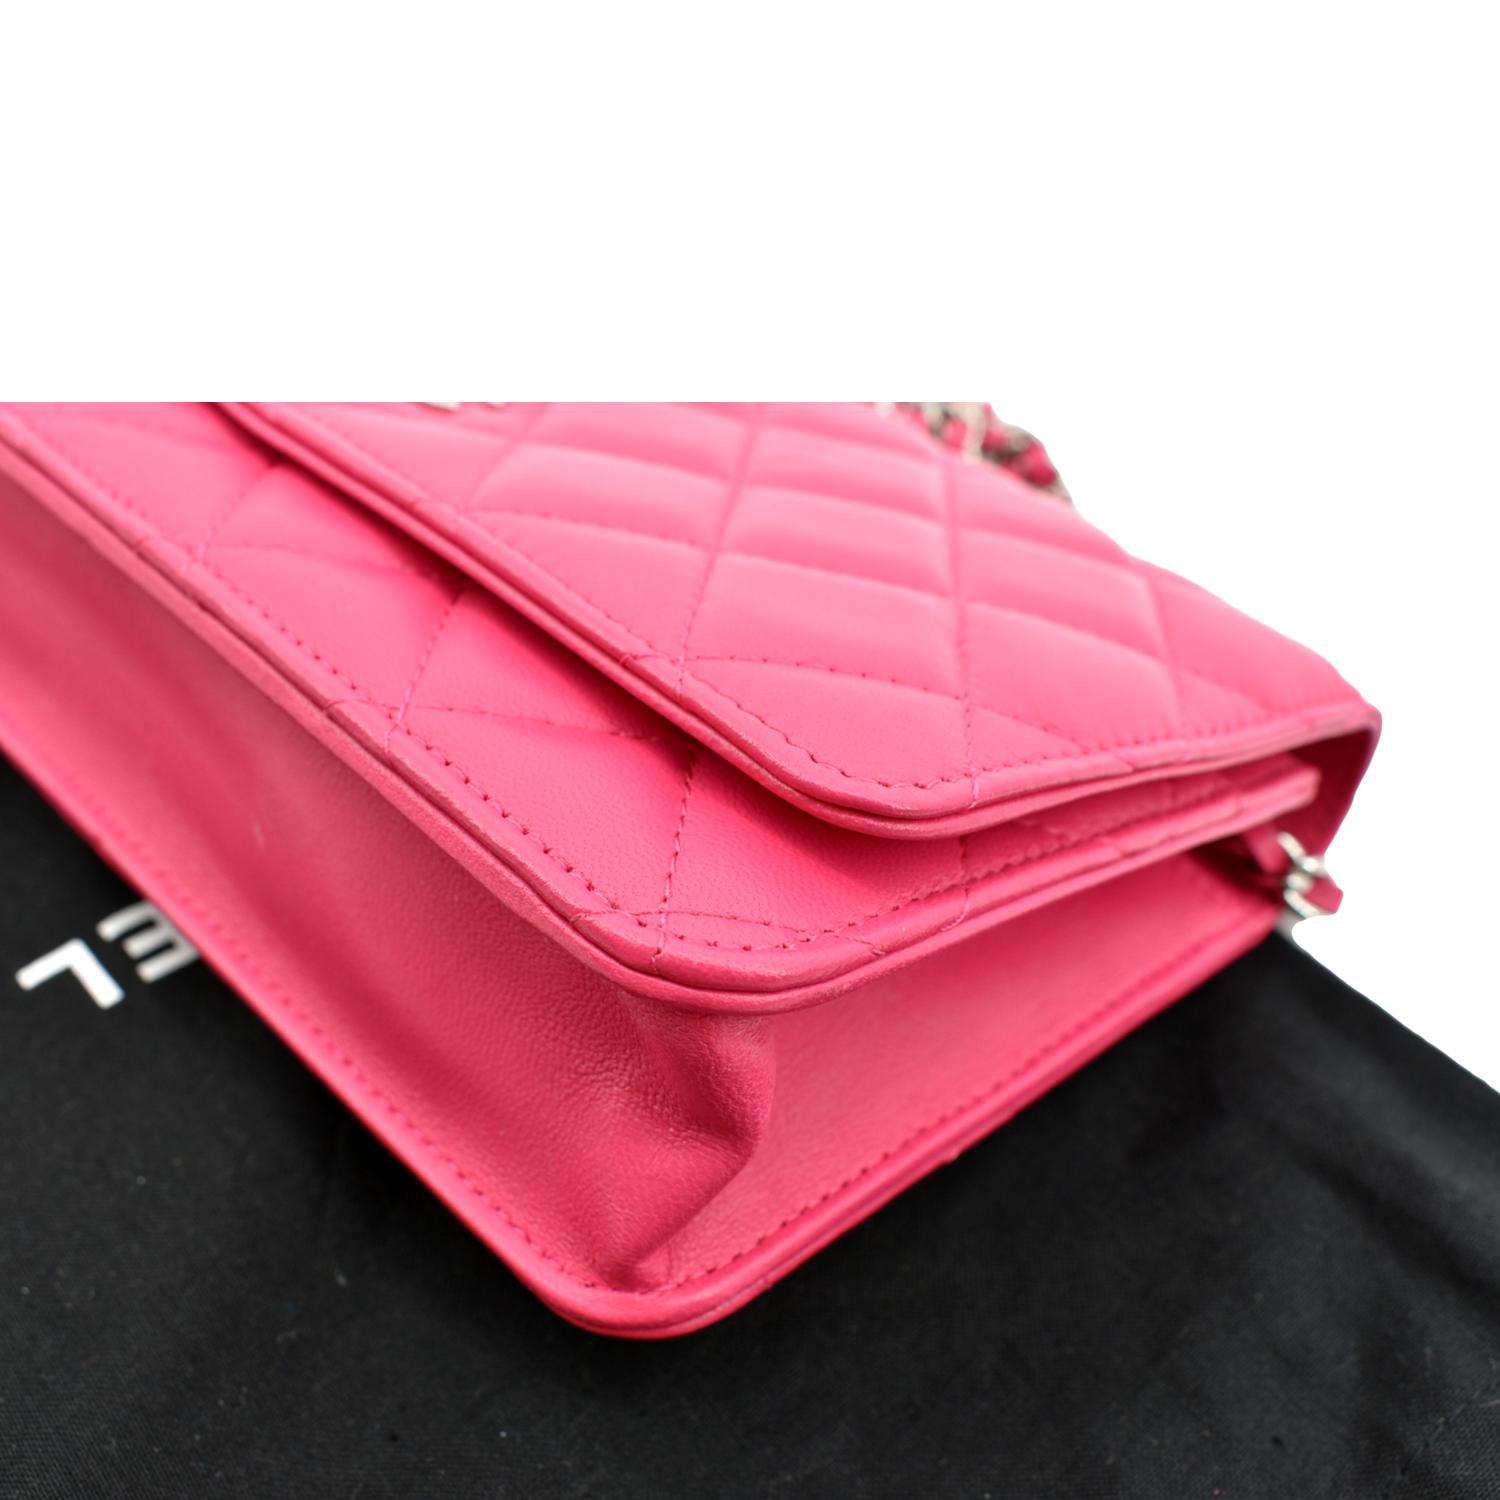 Authentic Chanel Camellia Pink Wallet on Chain WOC GHW